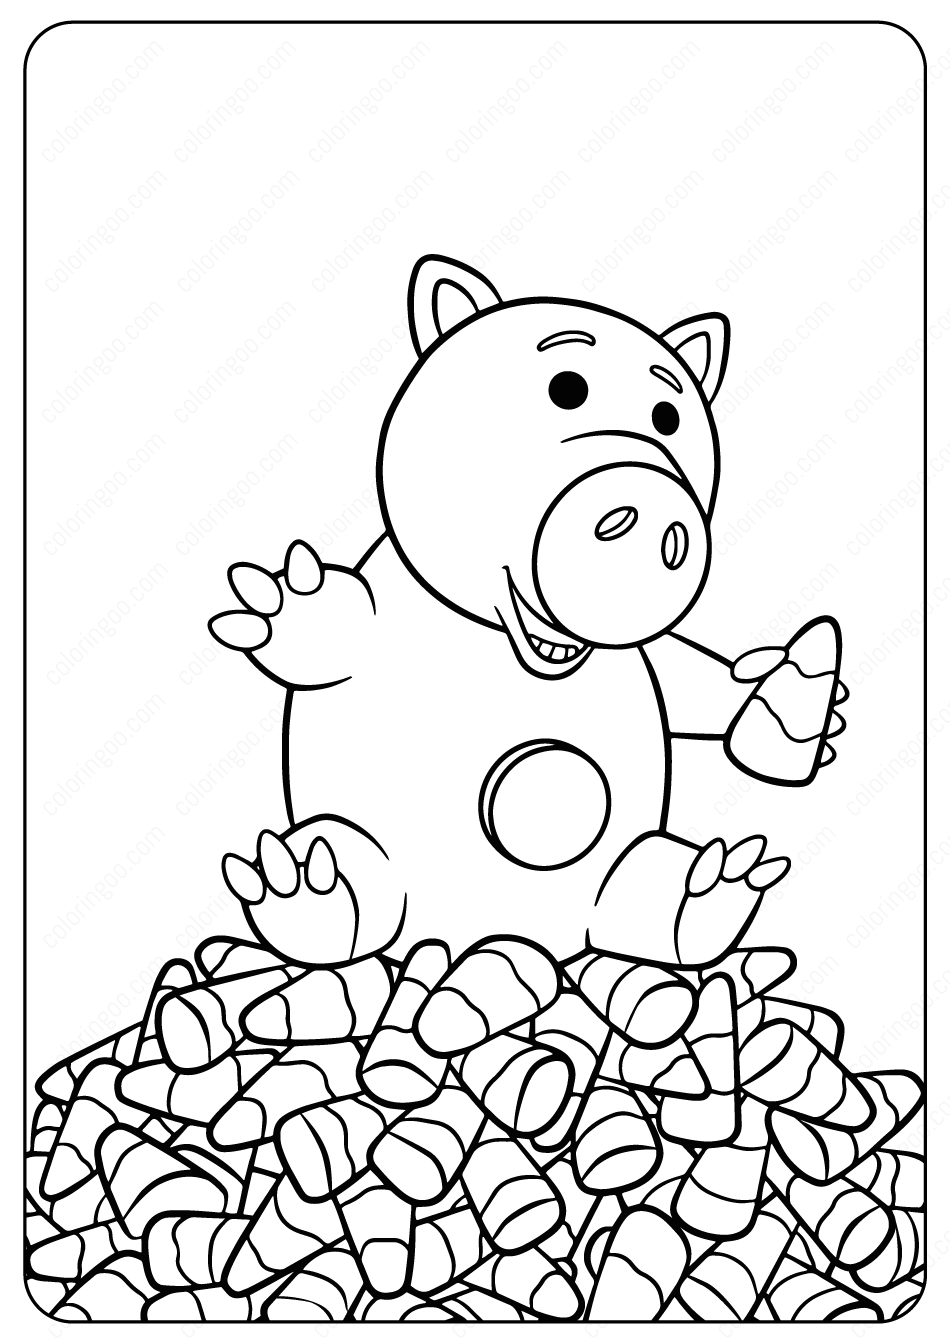 Disney Toy Story Hamm Halloween Coloring Pages